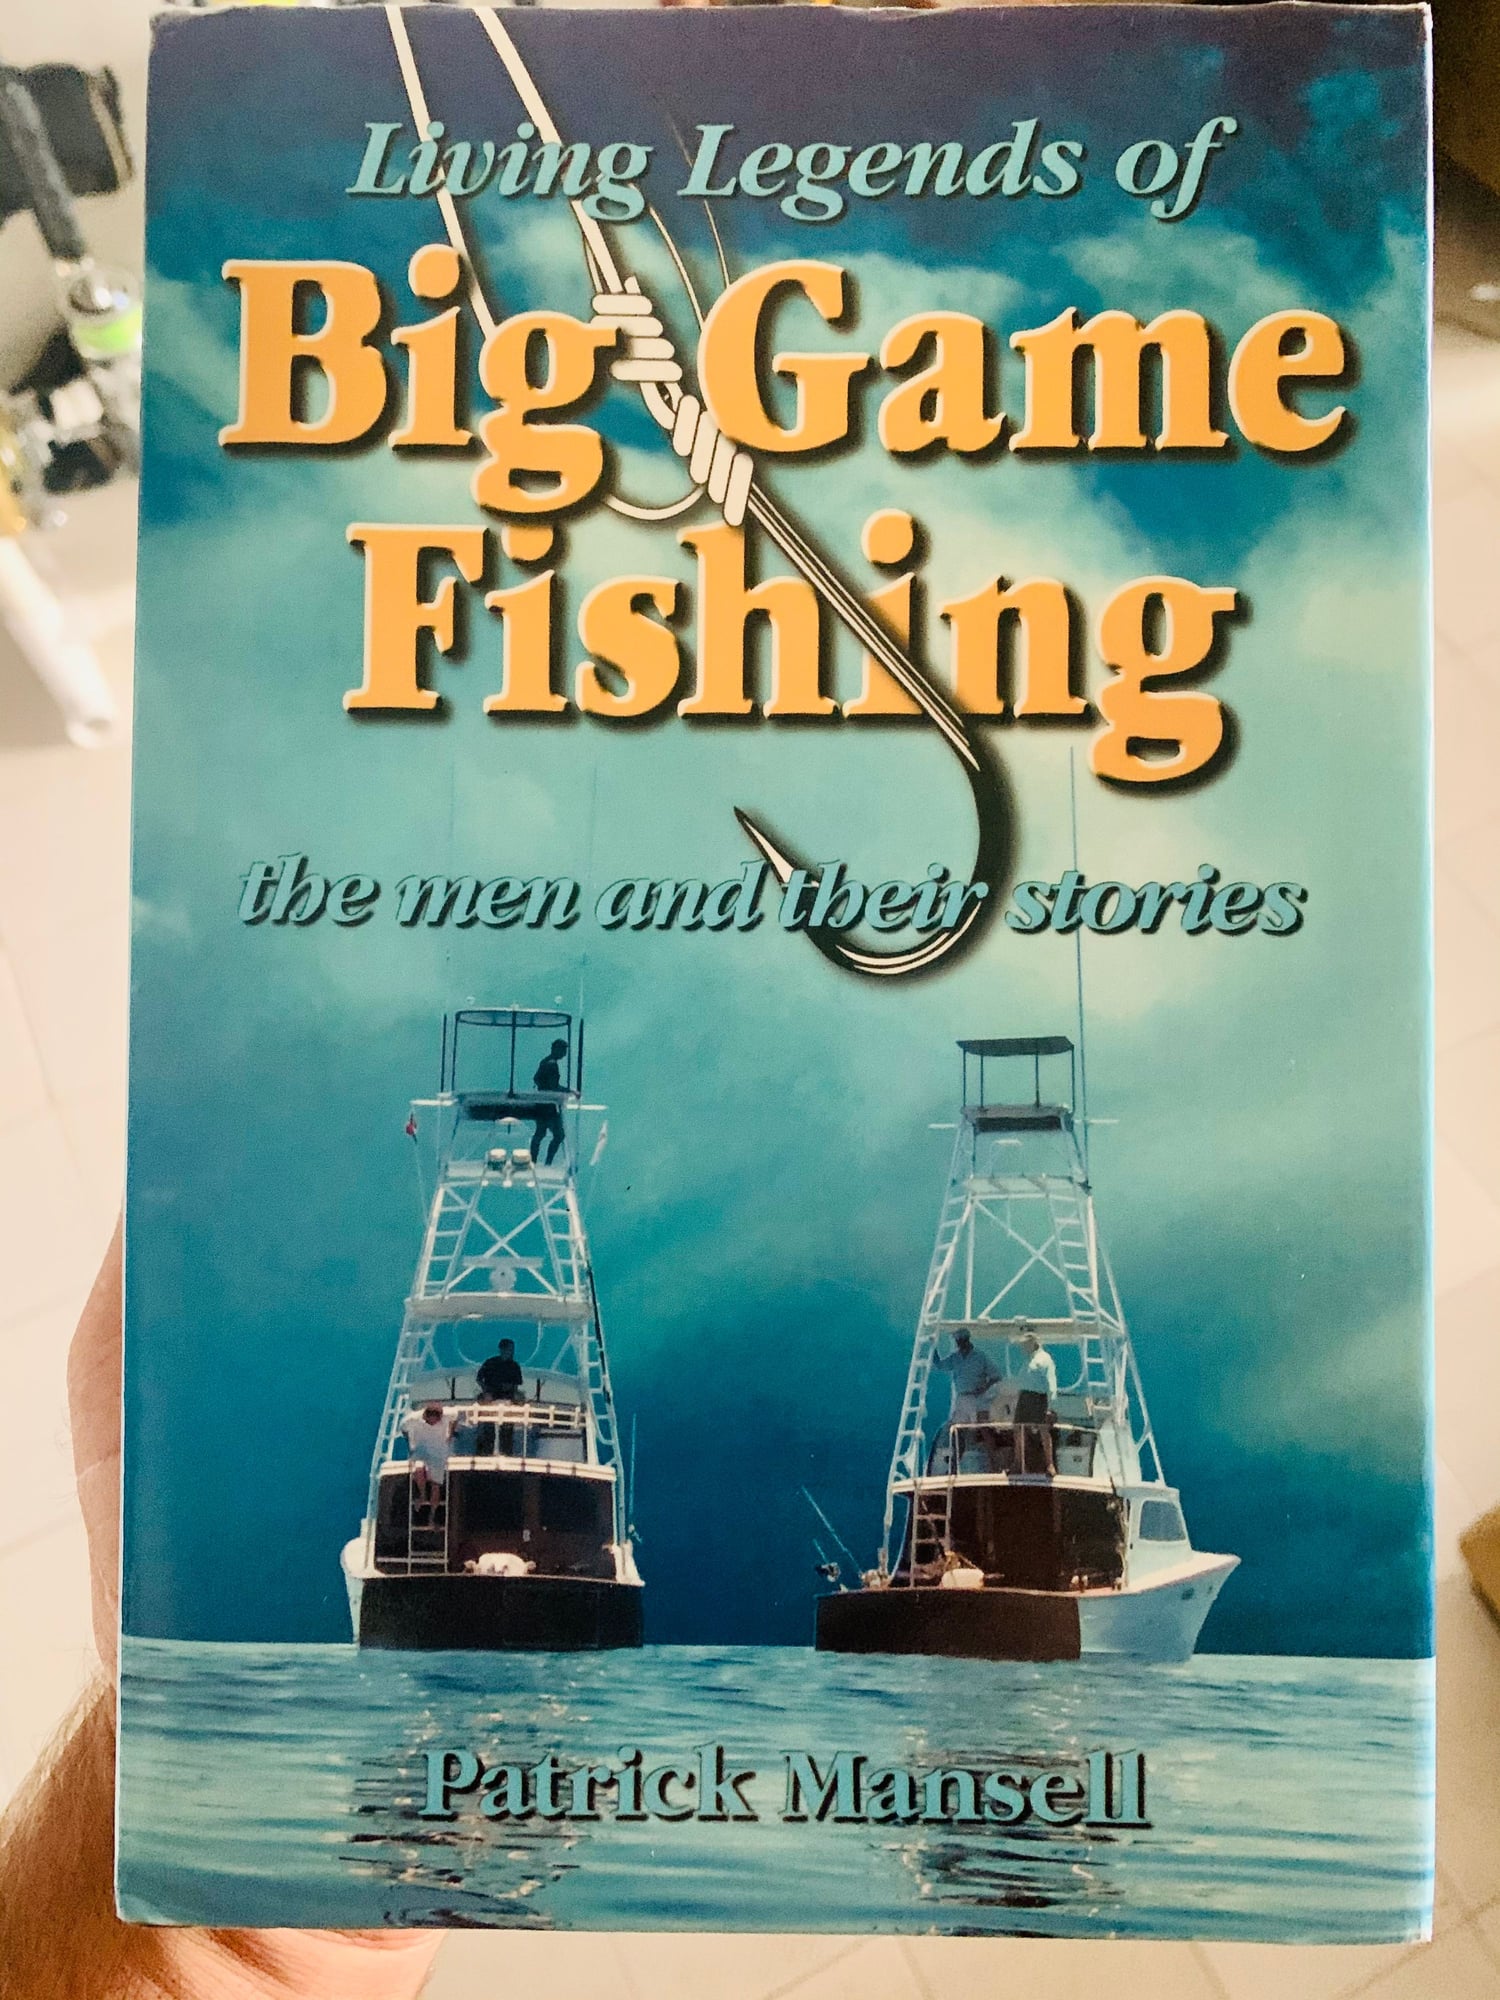 Classic book on sport fishing - The Hull Truth - Boating and Fishing Forum